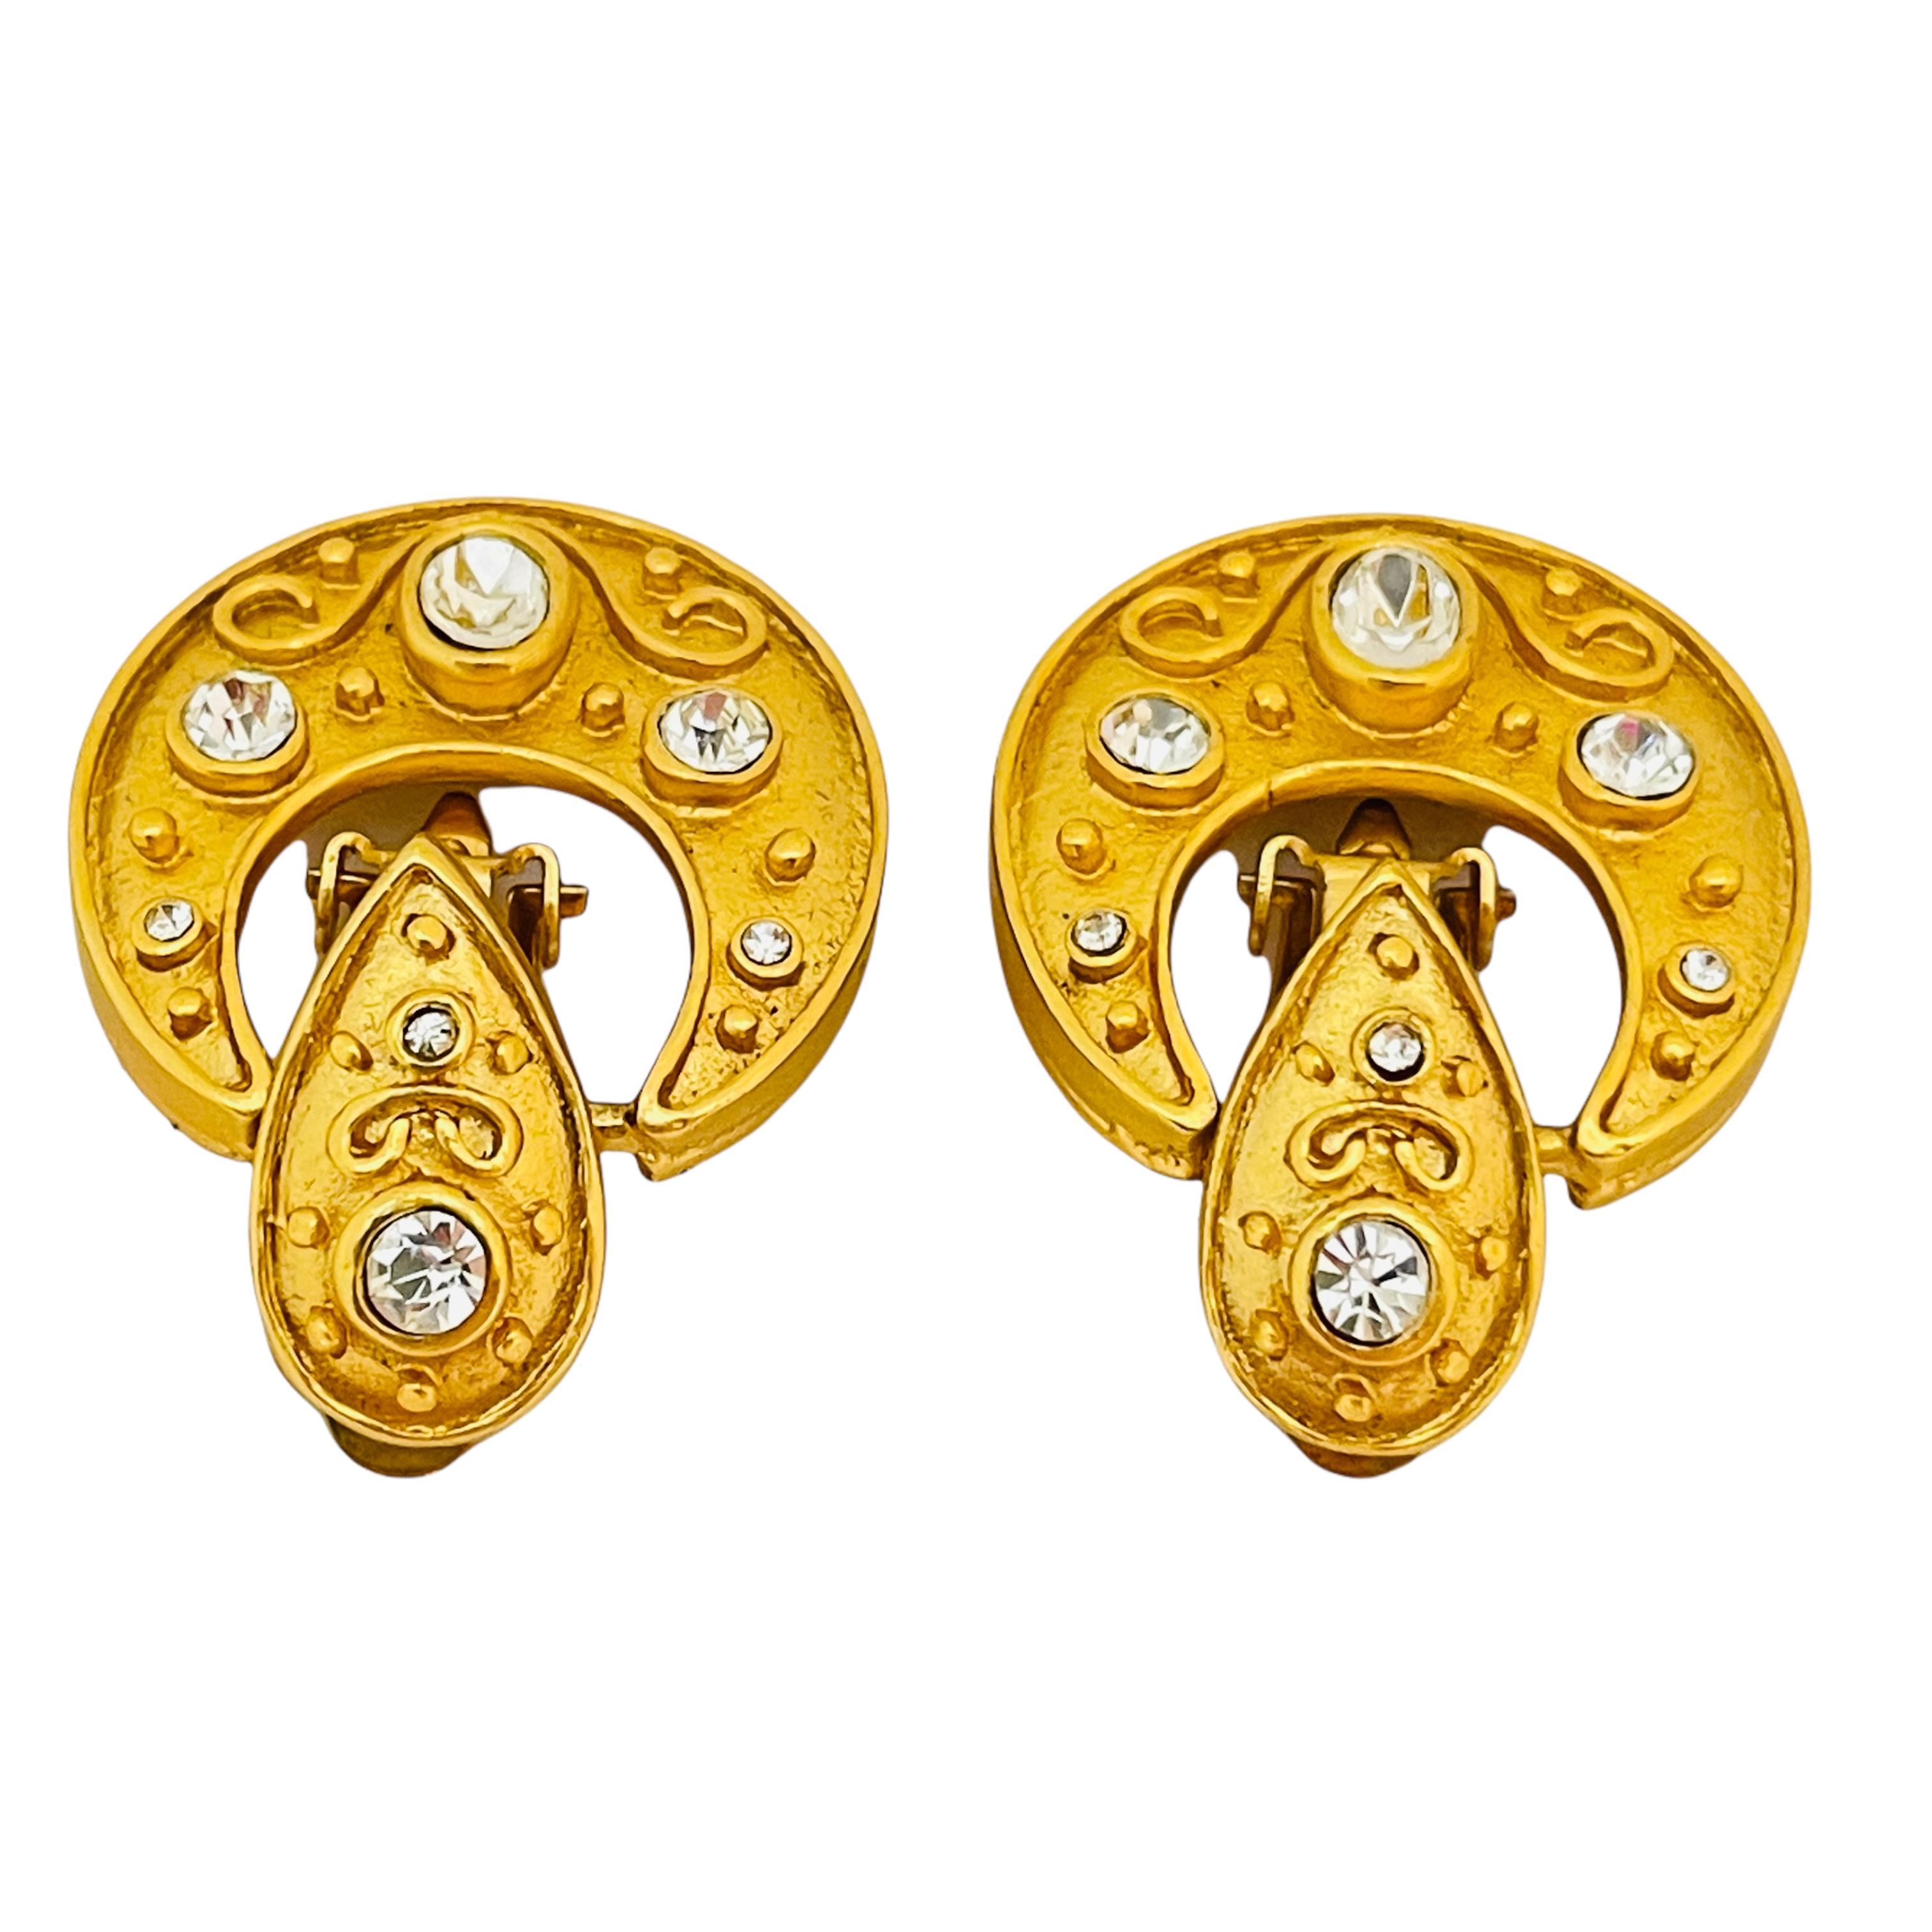 Vintage gold tone glass Etruscan style door knocker clip on designer earrings In Good Condition For Sale In Palos Hills, IL